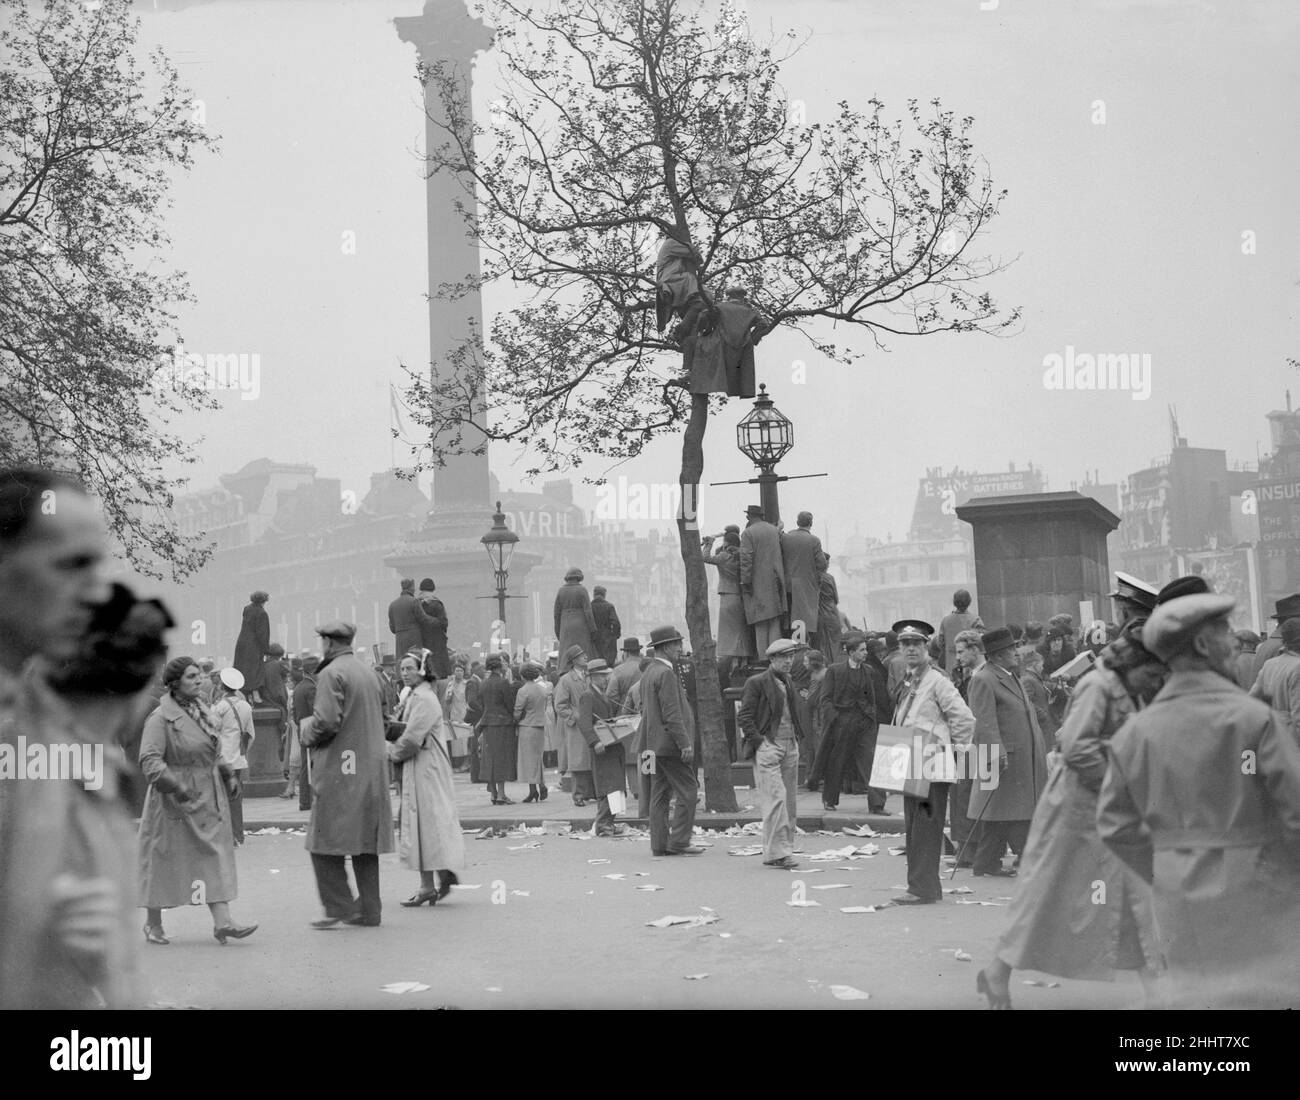 Coronation of King George VI. crowds gathered in Trafalgar Square awaiting the arrival of the procession. Some climb tress to get a better view.  12th May 1937. Stock Photo